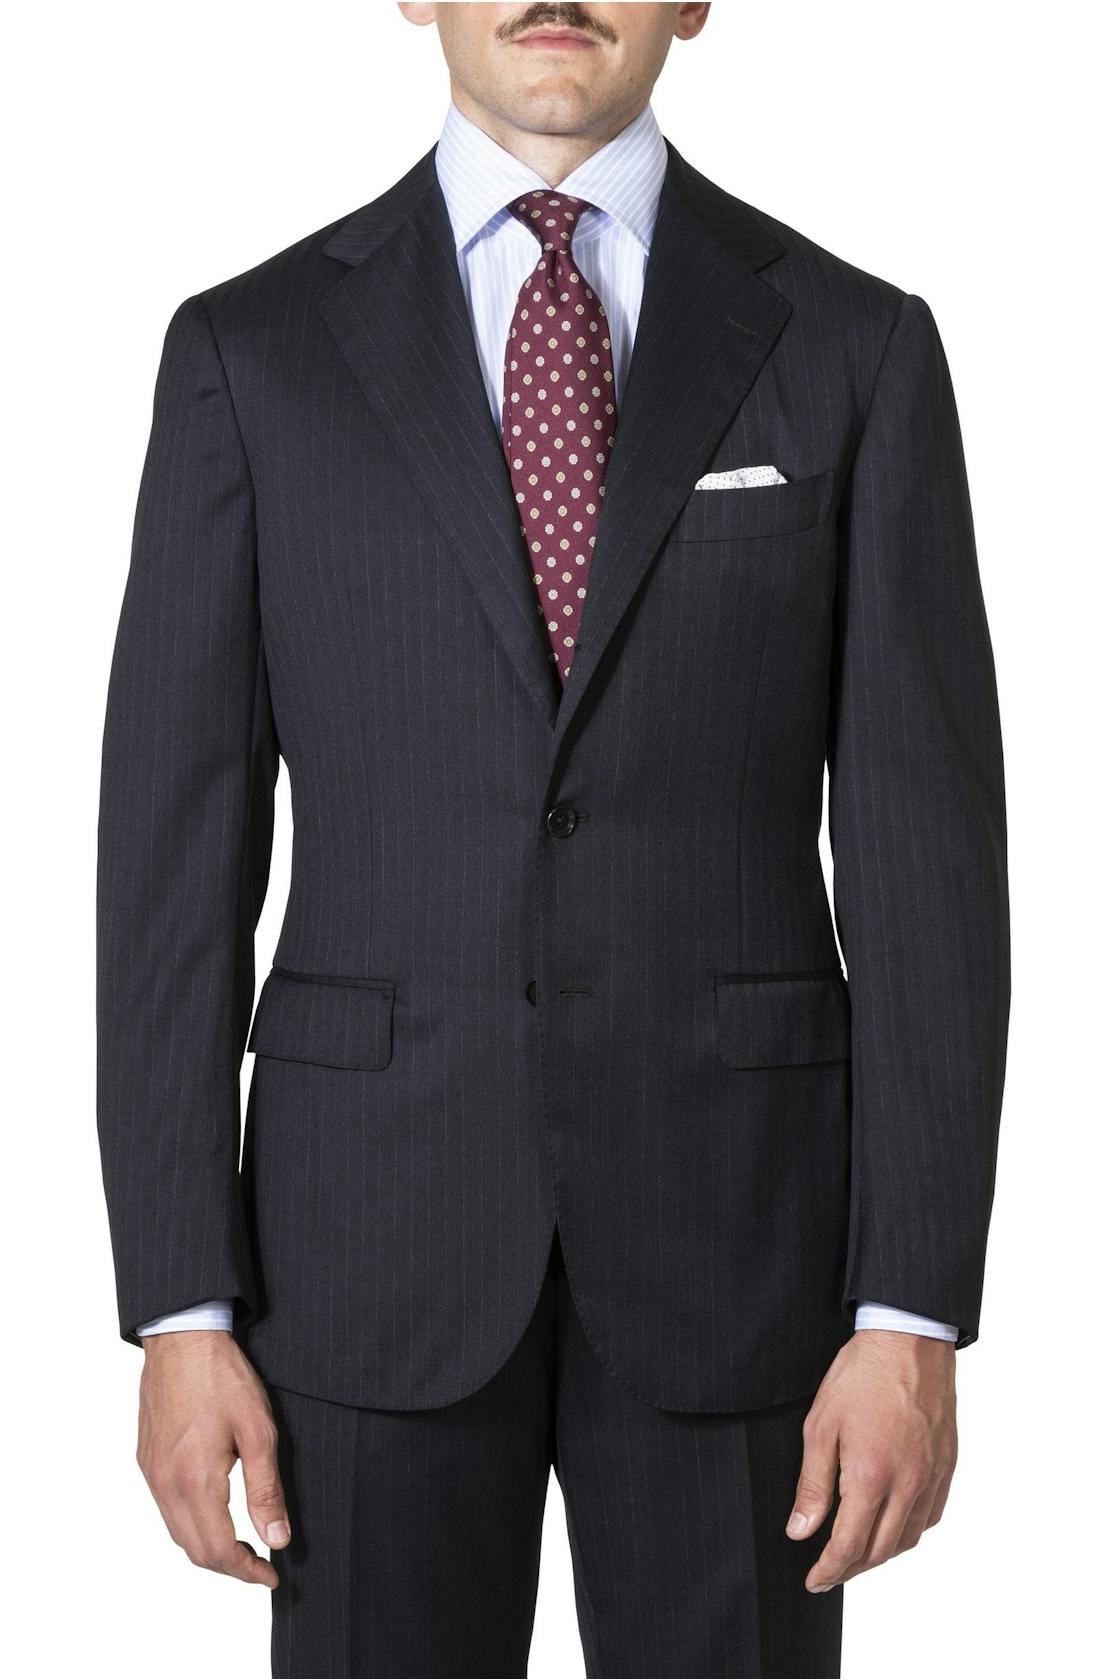 The Armoury by Ring Jacket Model 3A Charcoal Wool Fine Stripe Suit